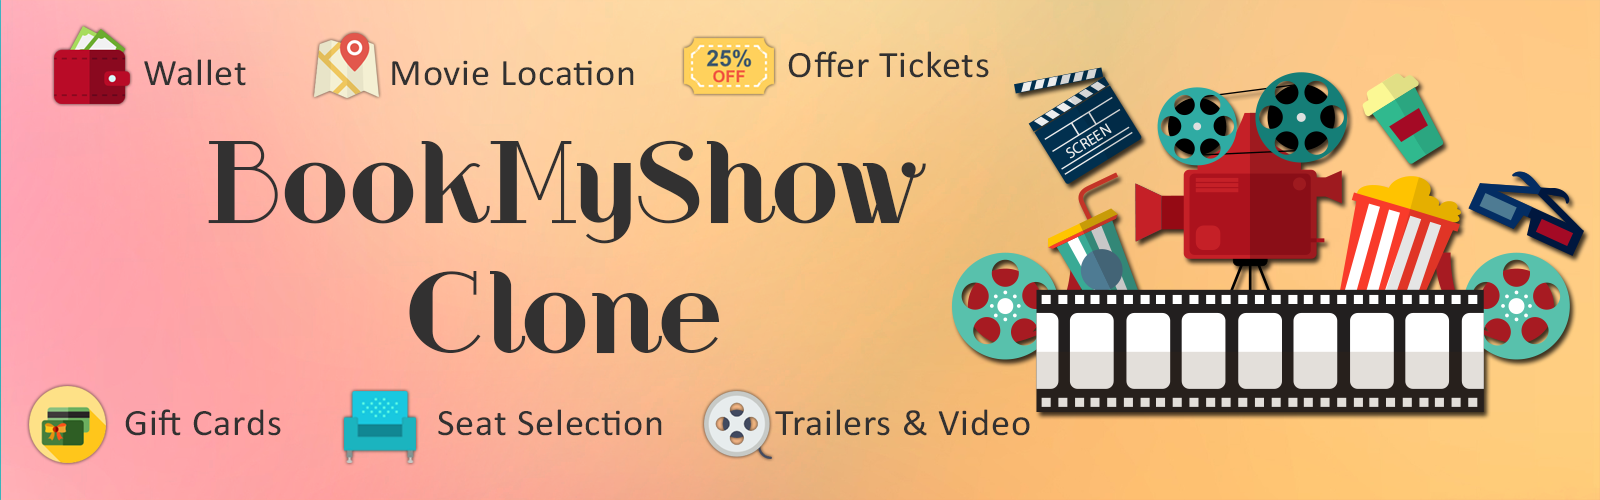 doditsolutions-Book My Show Clone Banner